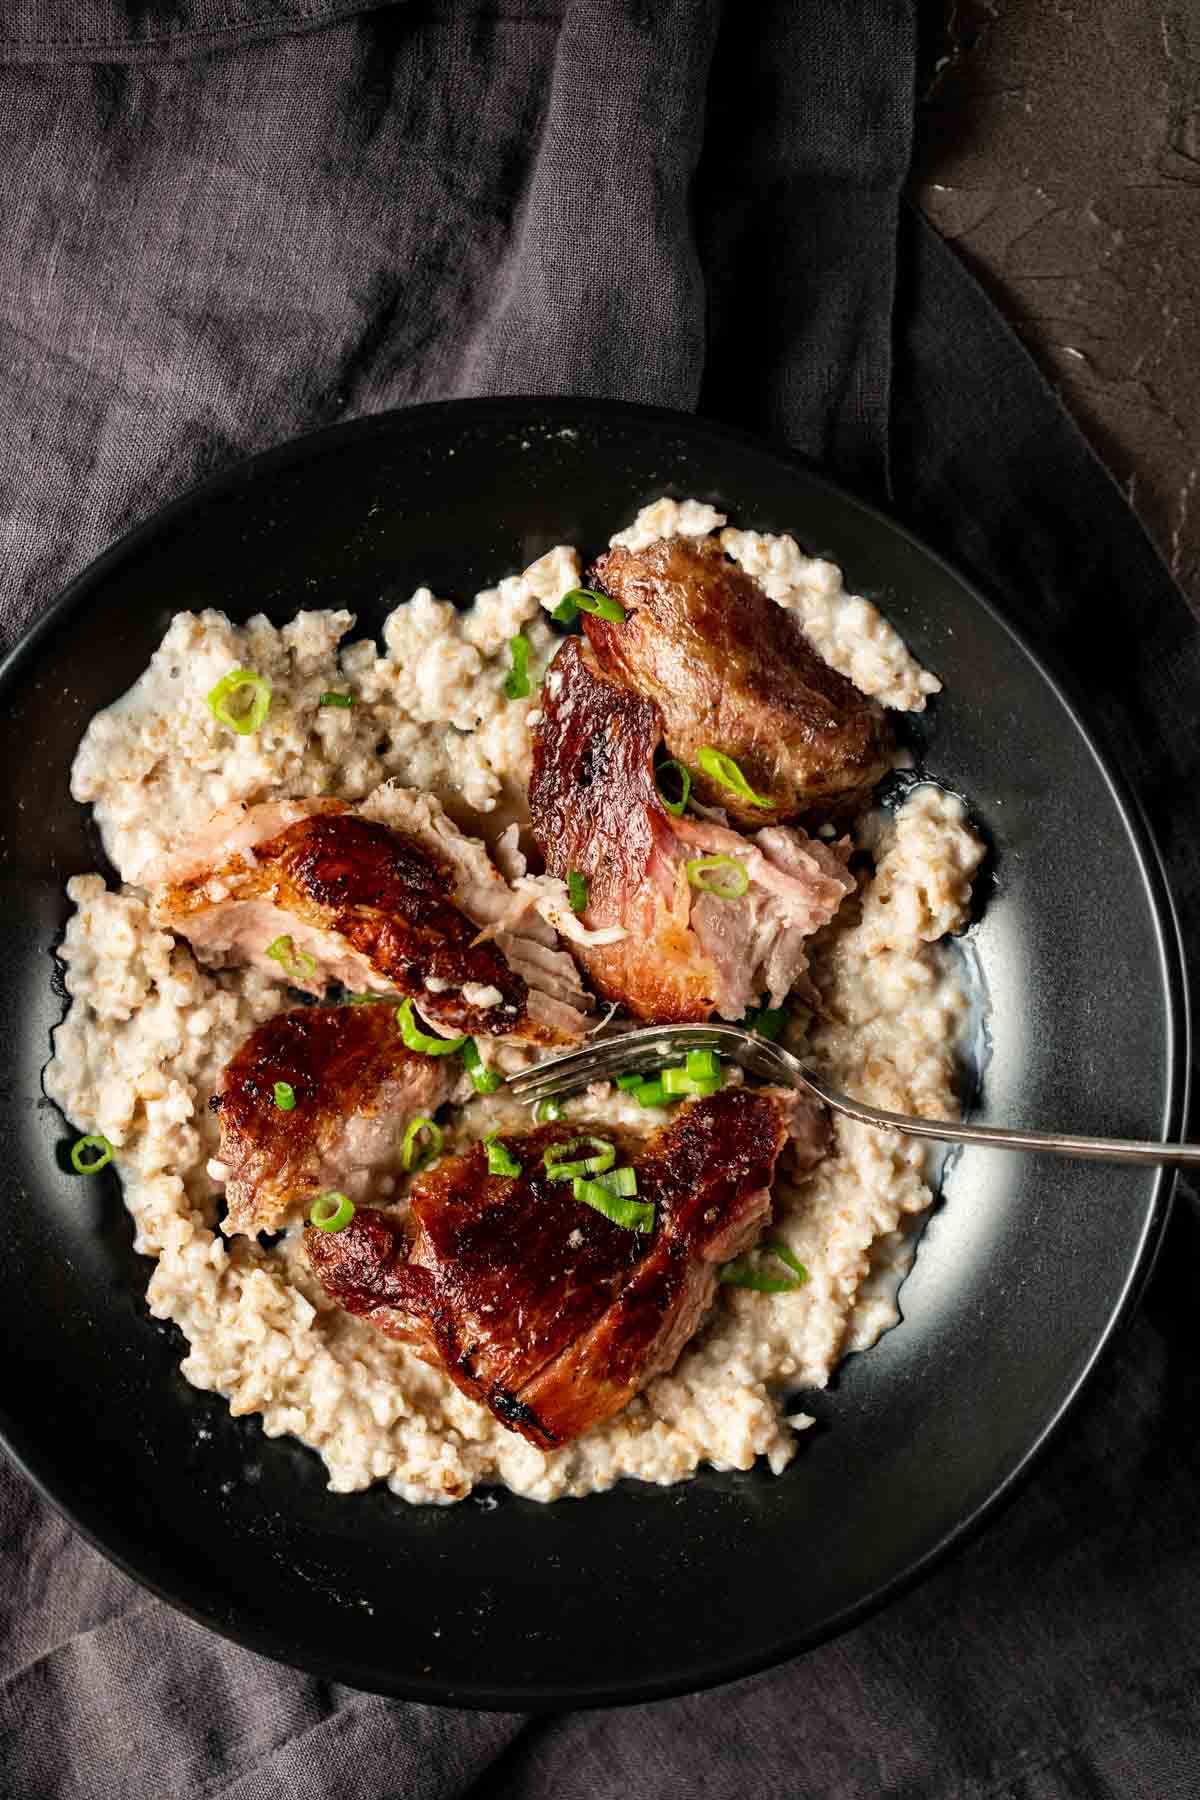 Overhead view of pork shoulder and rice on a plate with a fork.